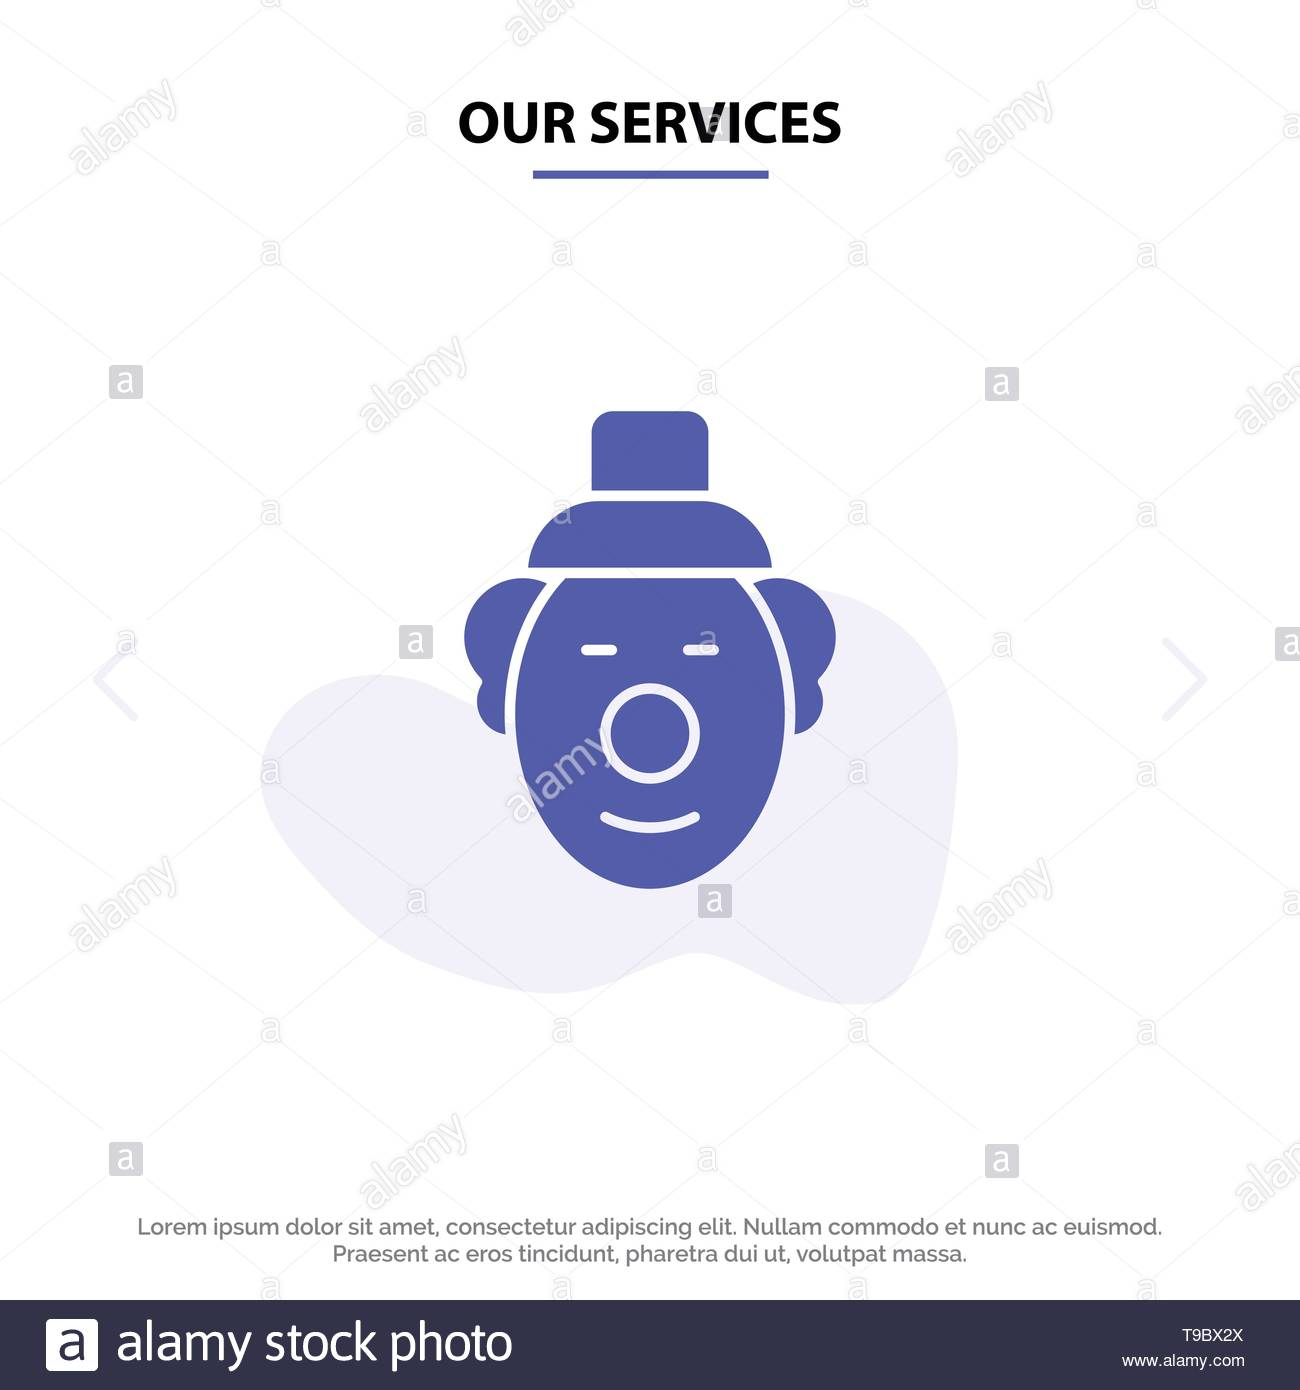 Our Services Joker, Clown, Circus Solid Glyph Icon Web Card In Joker Card Template